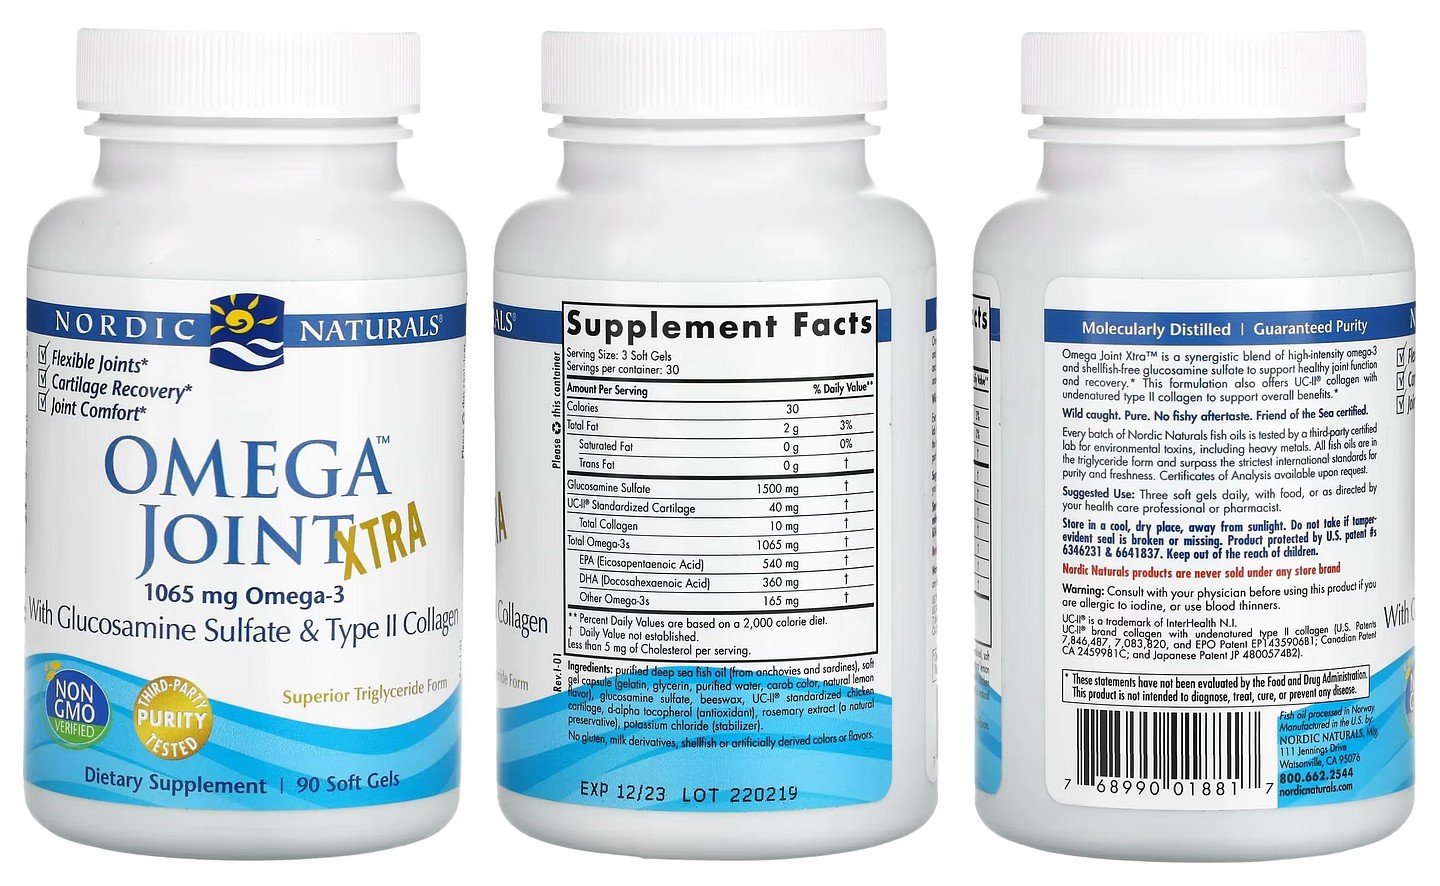 Nordic Naturals, Omega Joint Xtra packaging